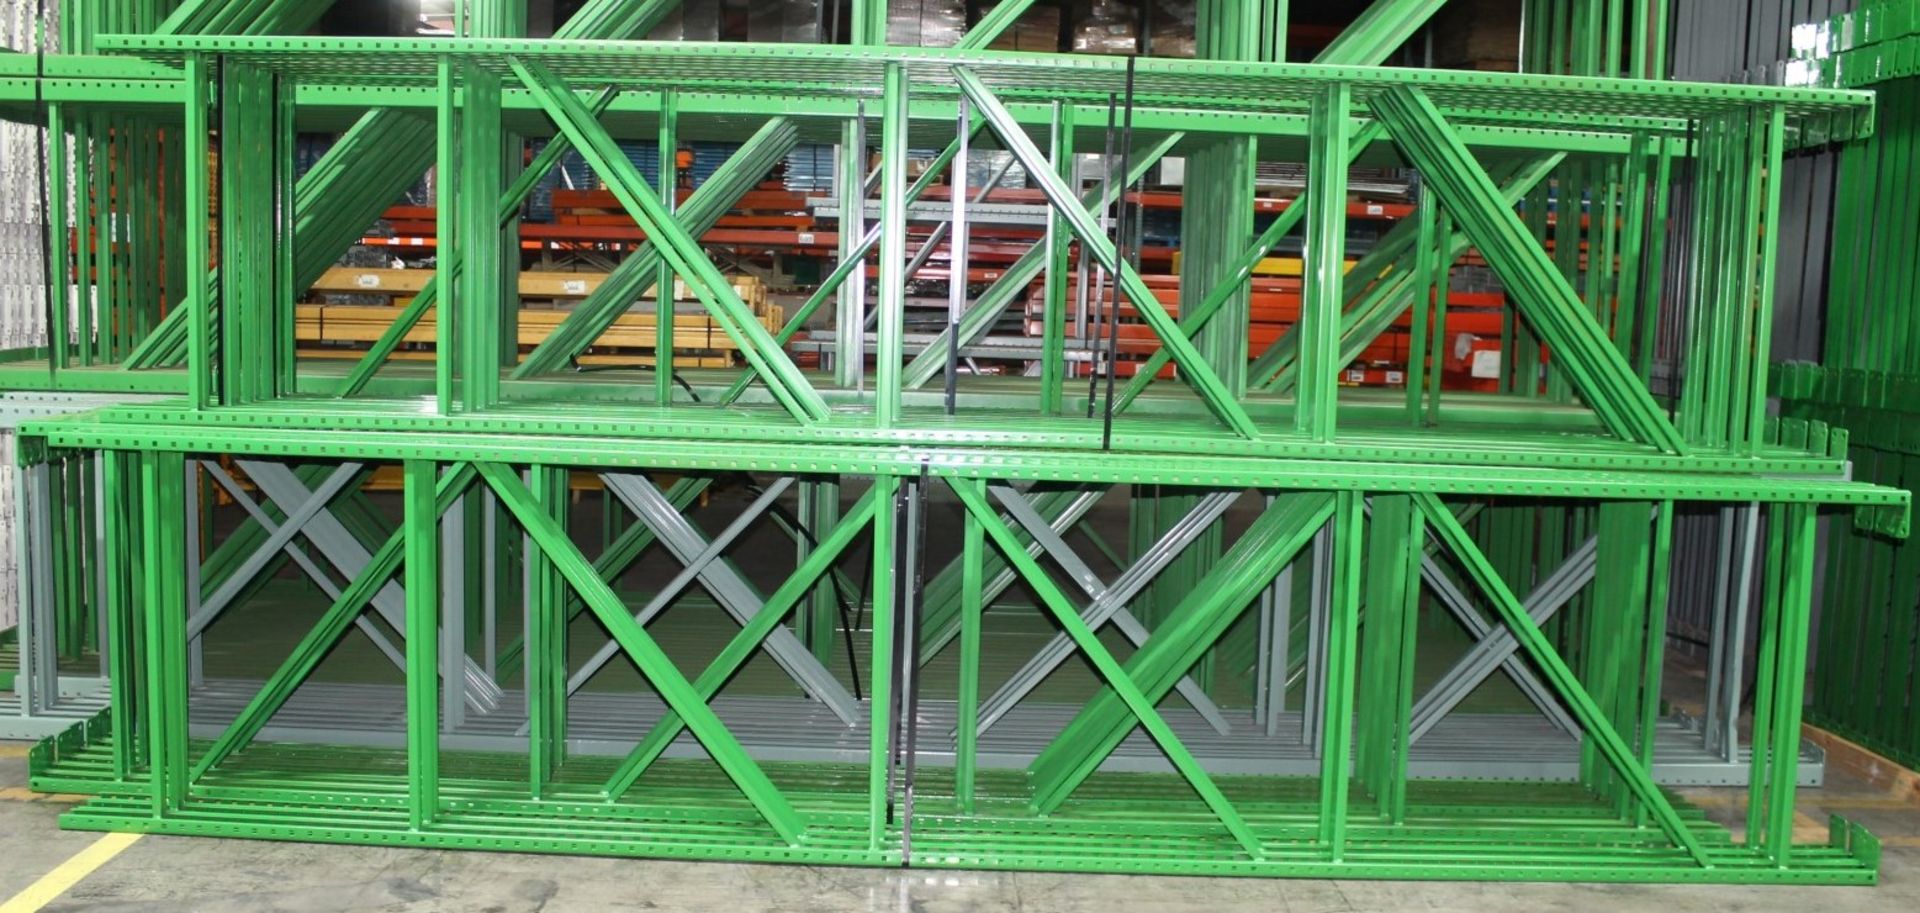 14 BAYS OF TEARDROP STYLE PALLET RACK, LIKE NEW, SIZE: 16'H x 42"D X 8'W - Image 2 of 5